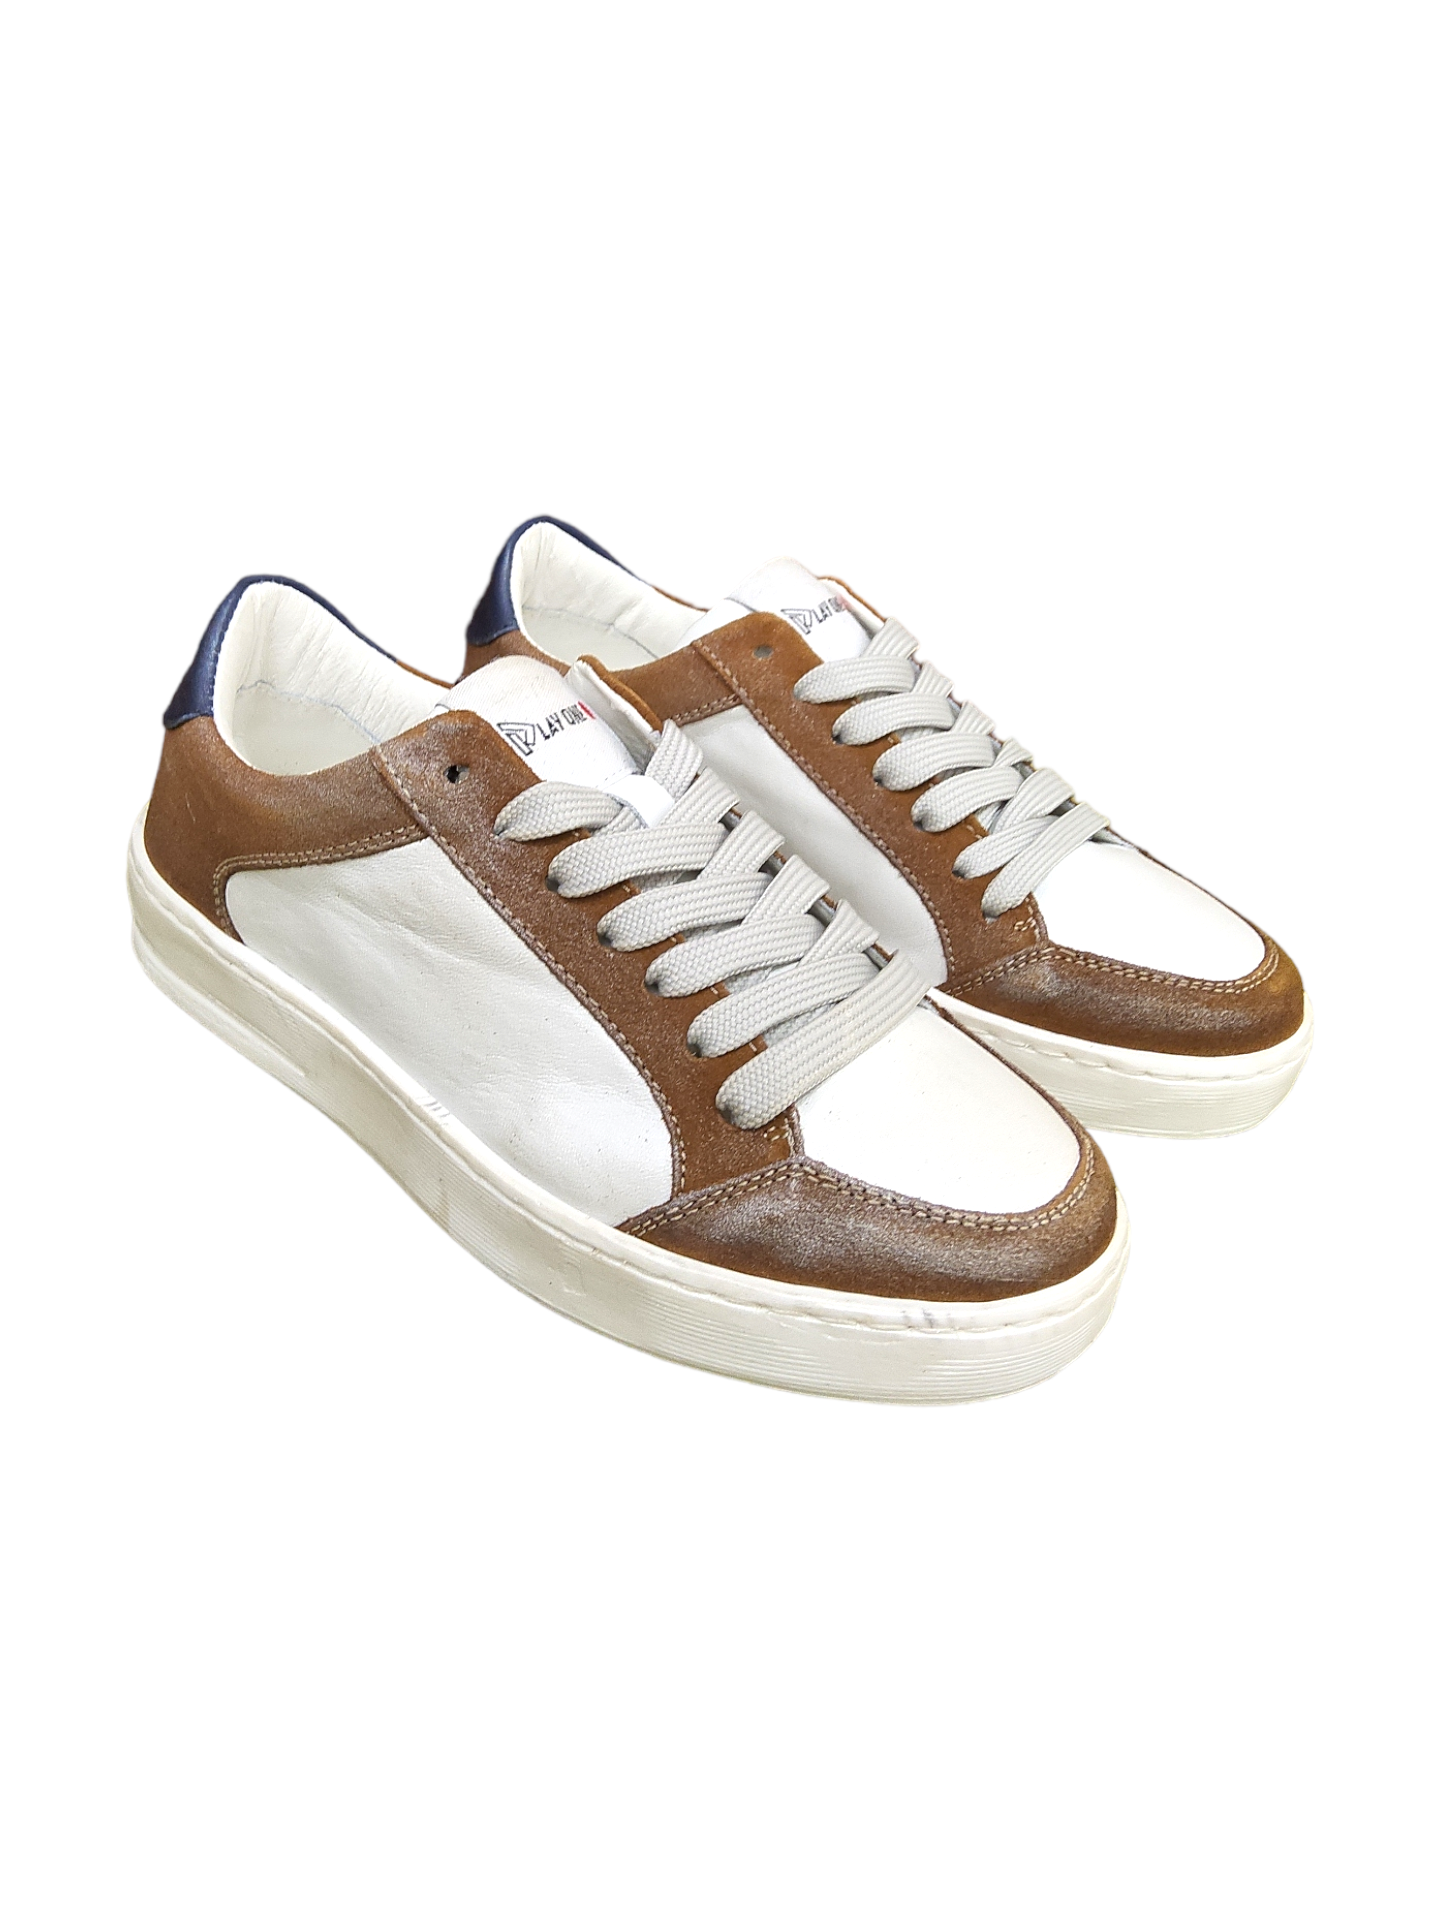 White/Tan leather sneakers